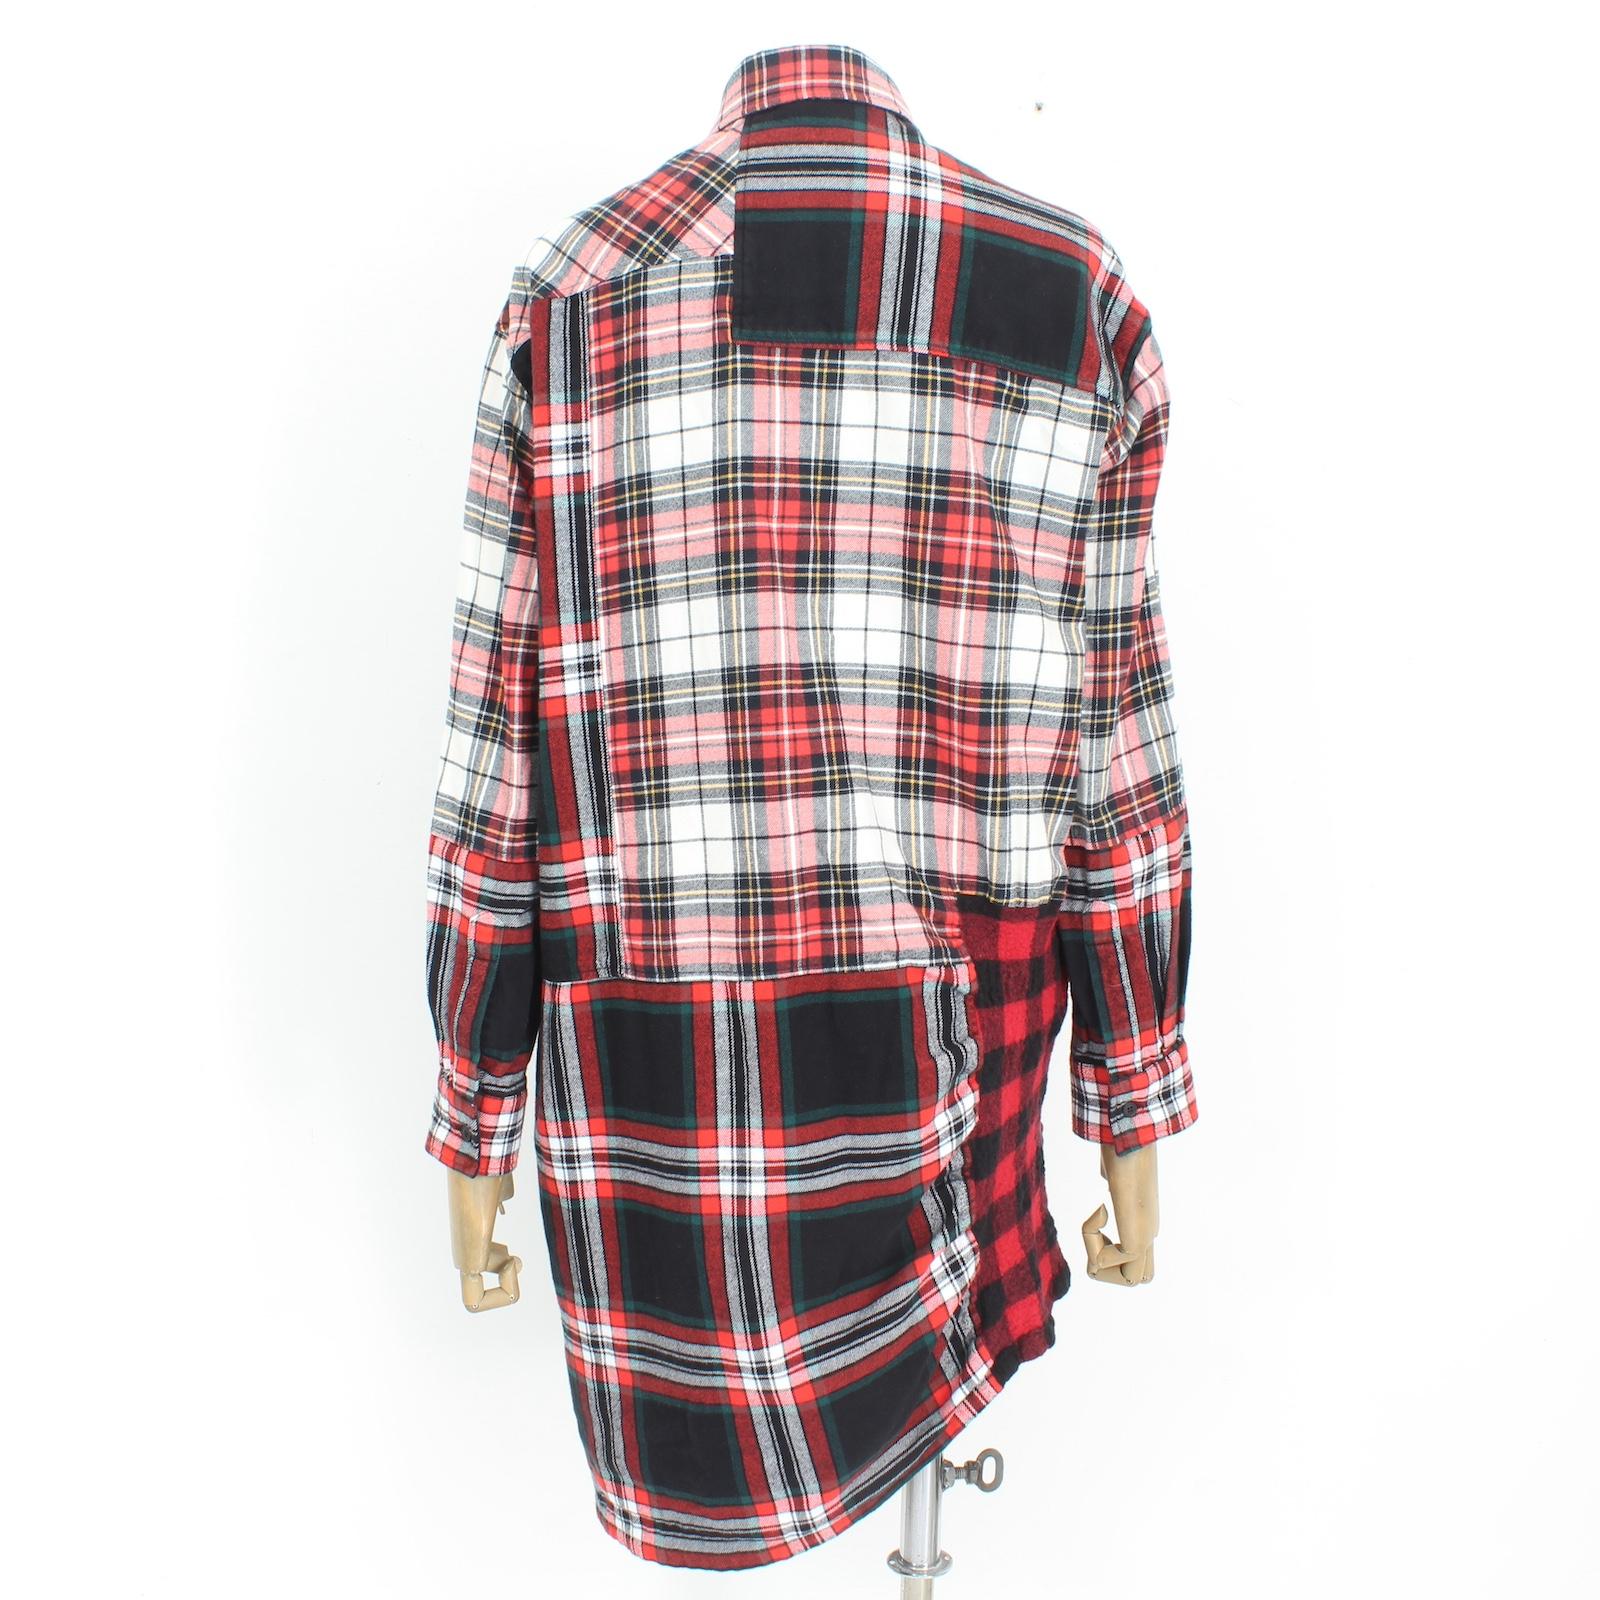 The Alexander McQueen Red Check Dress from the 2000s is a versatile addition to any wardrobe. Made from a blend of cotton and wool, this long shirt-style dress features a striking red, white, and black check pattern. The asymmetric closure adds a